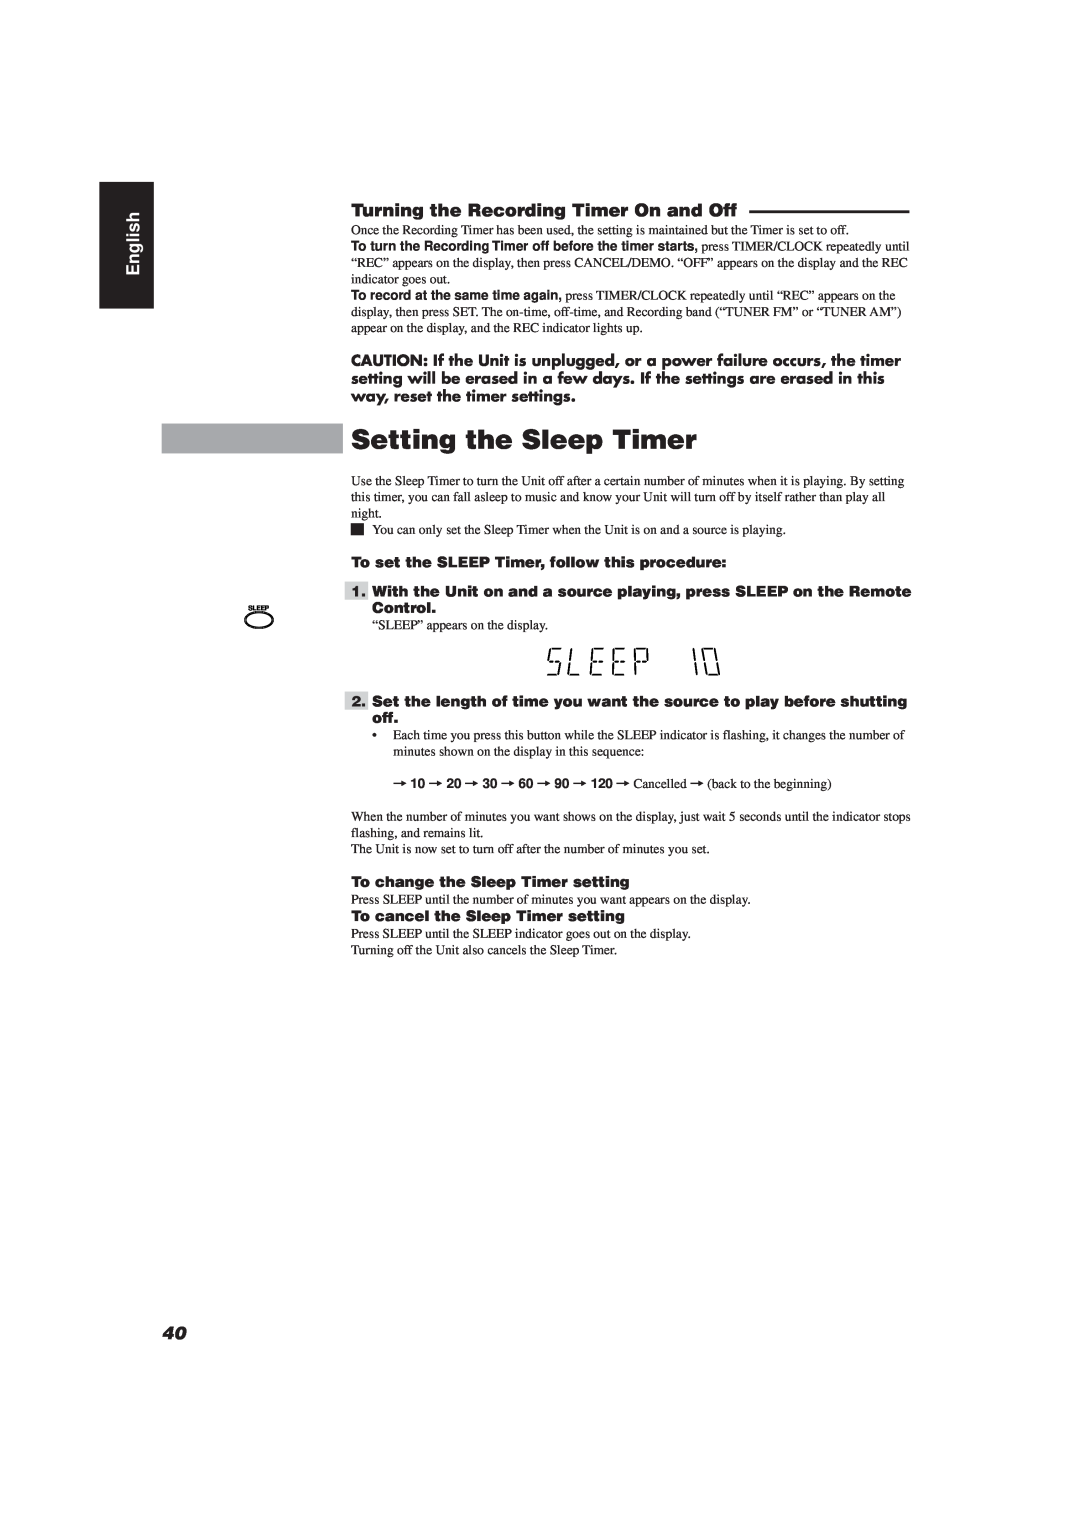 JVC CA-D752TR Setting the Sleep Timer, Turning the Recording Timer On and Off, English, To change the Sleep Timer setting 